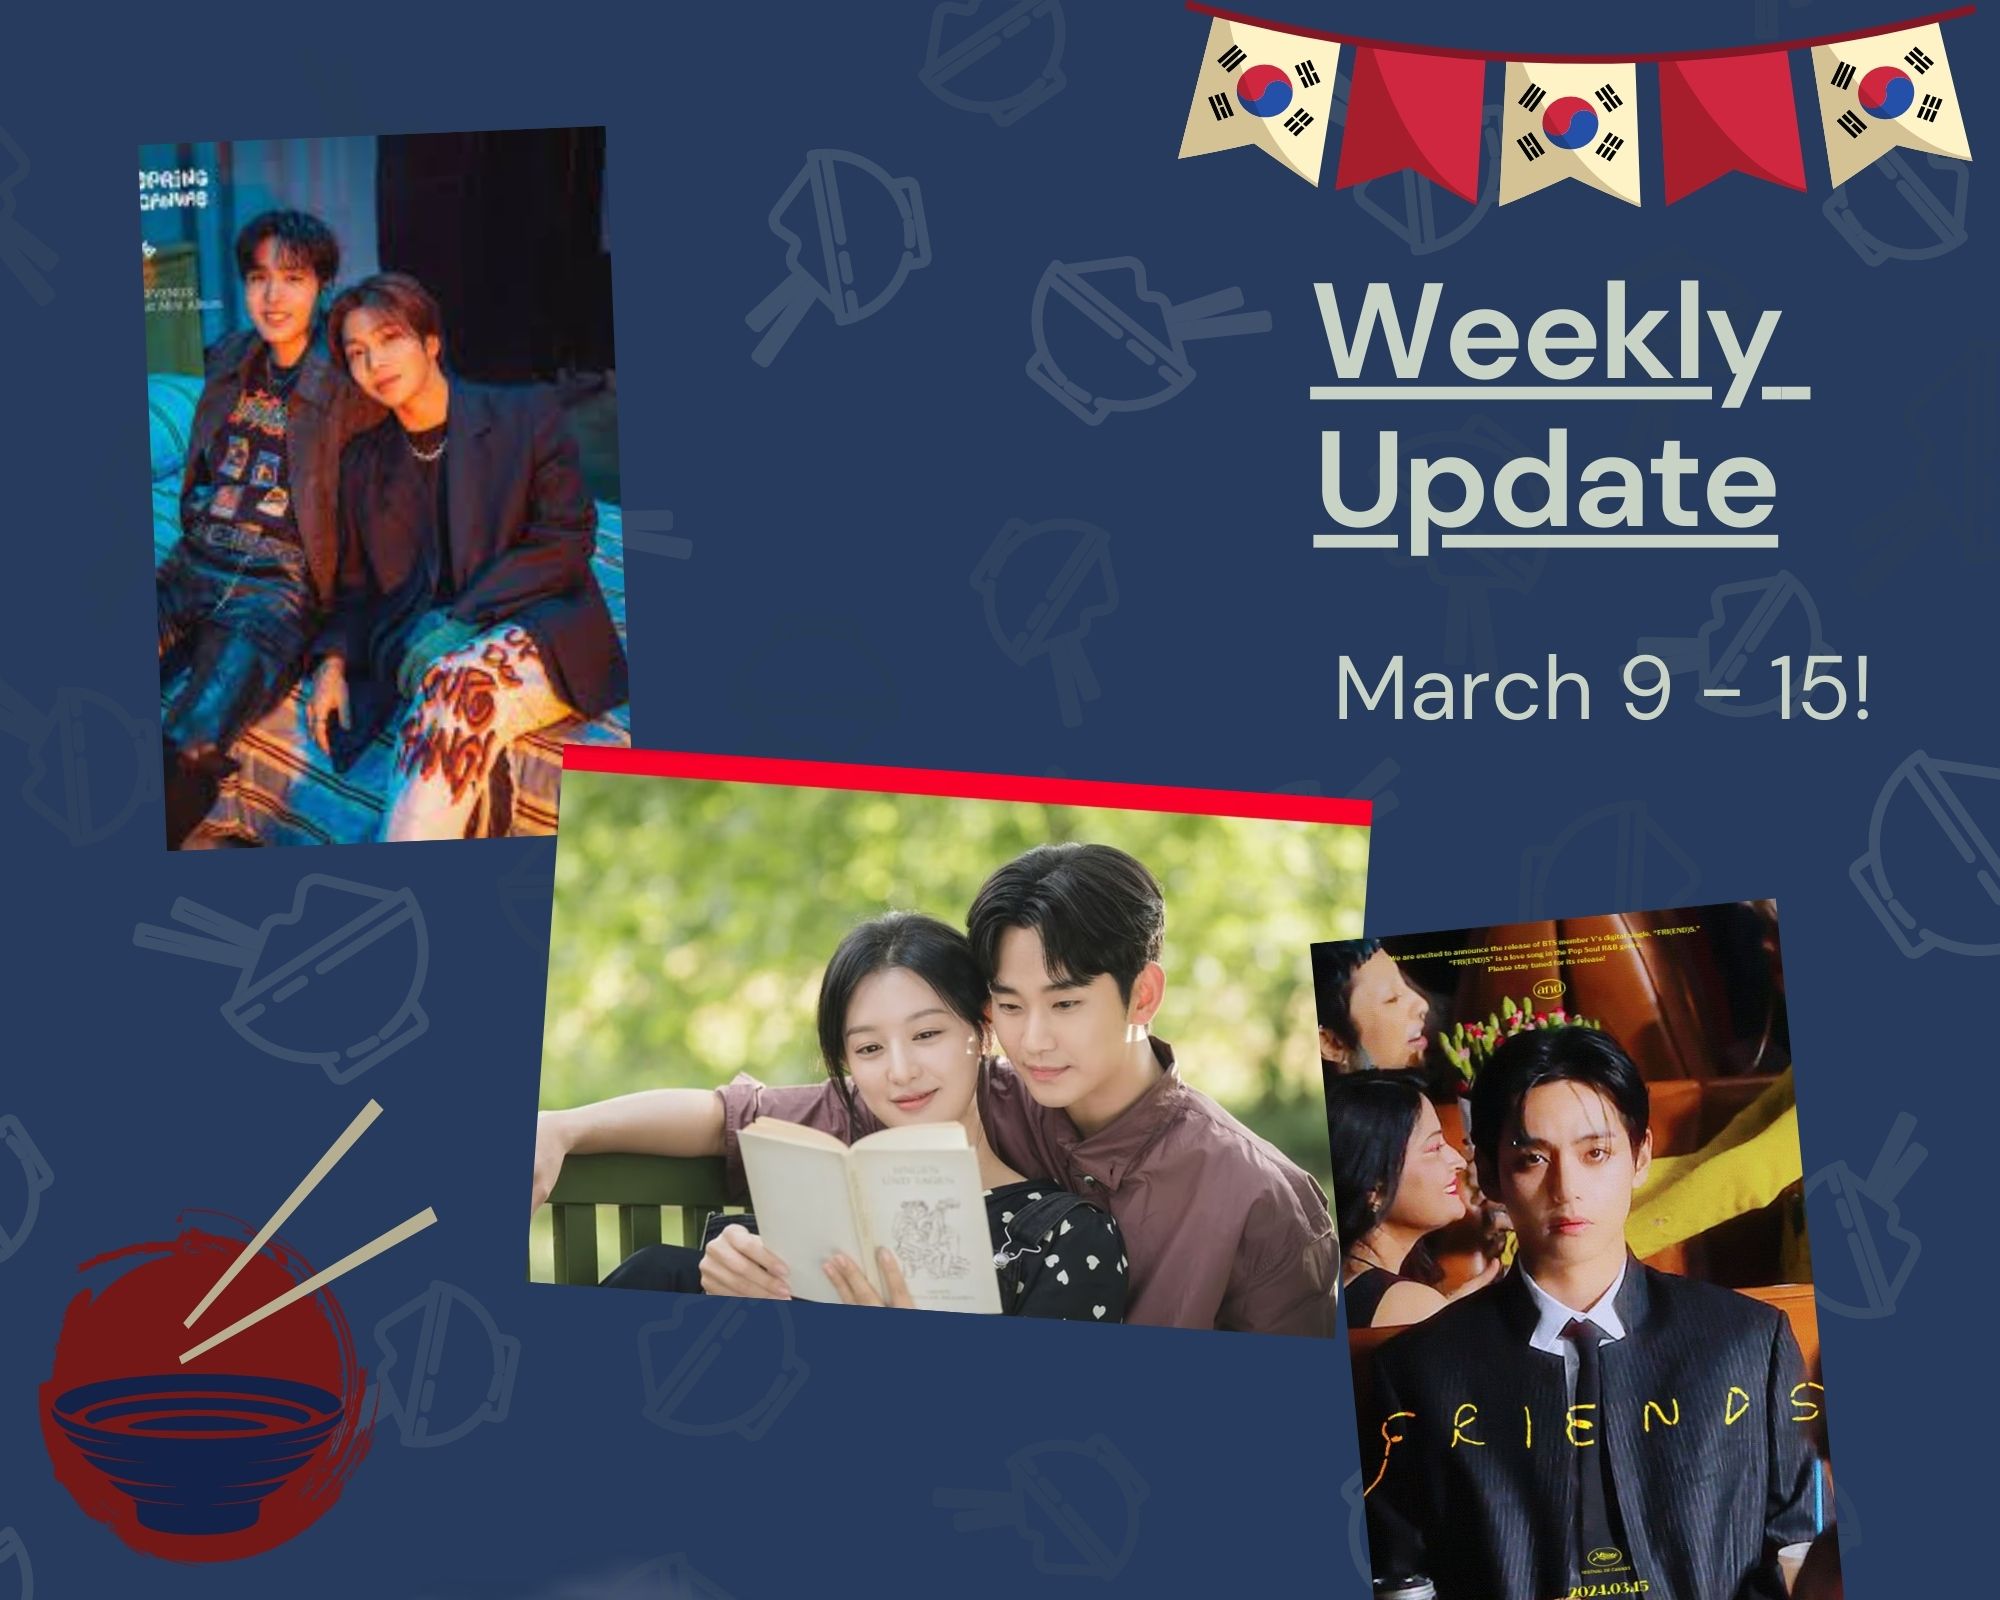 Weekly Update - March 9 - 15